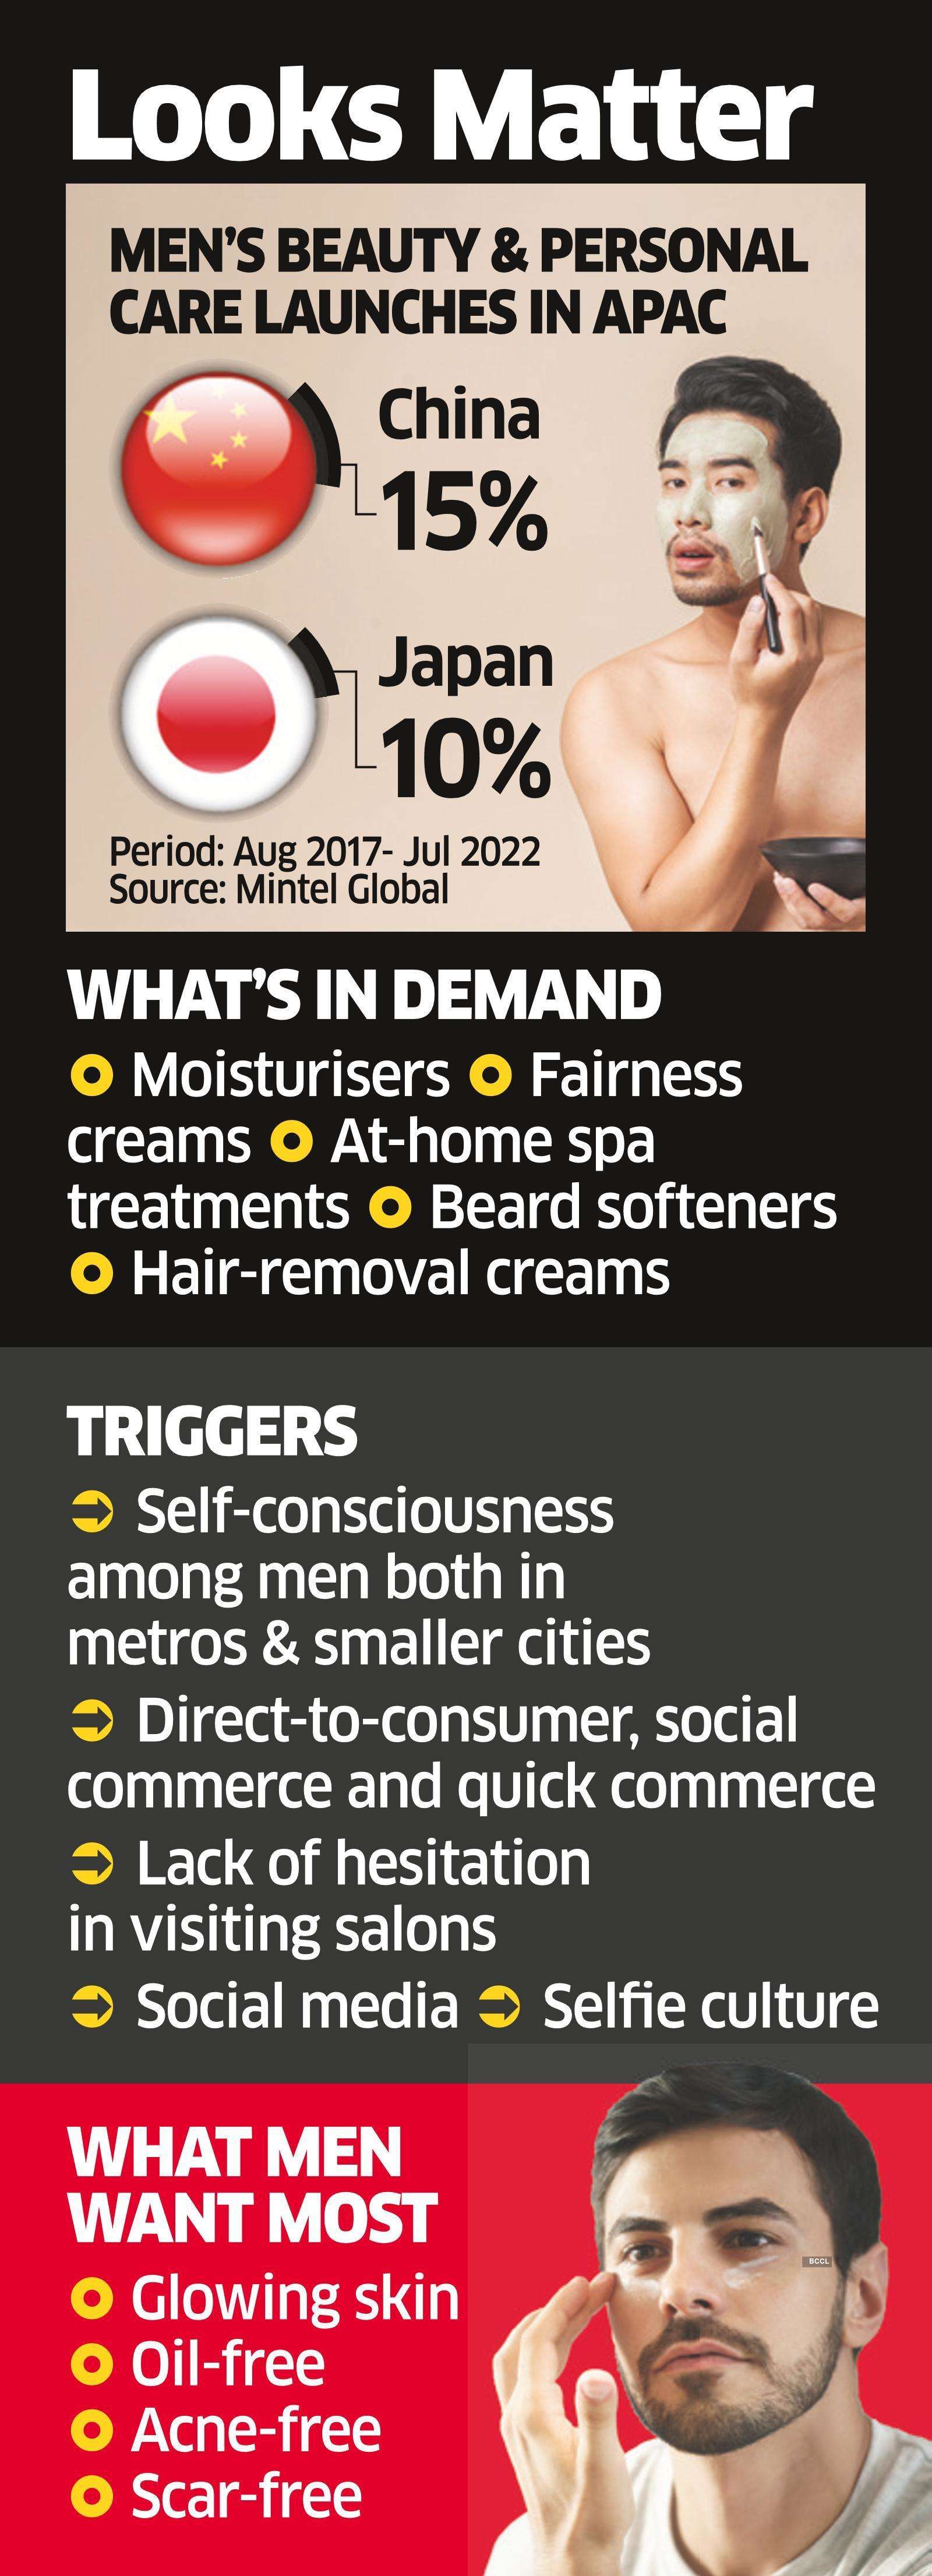 India tops APAC in men's beauty product launches: Report